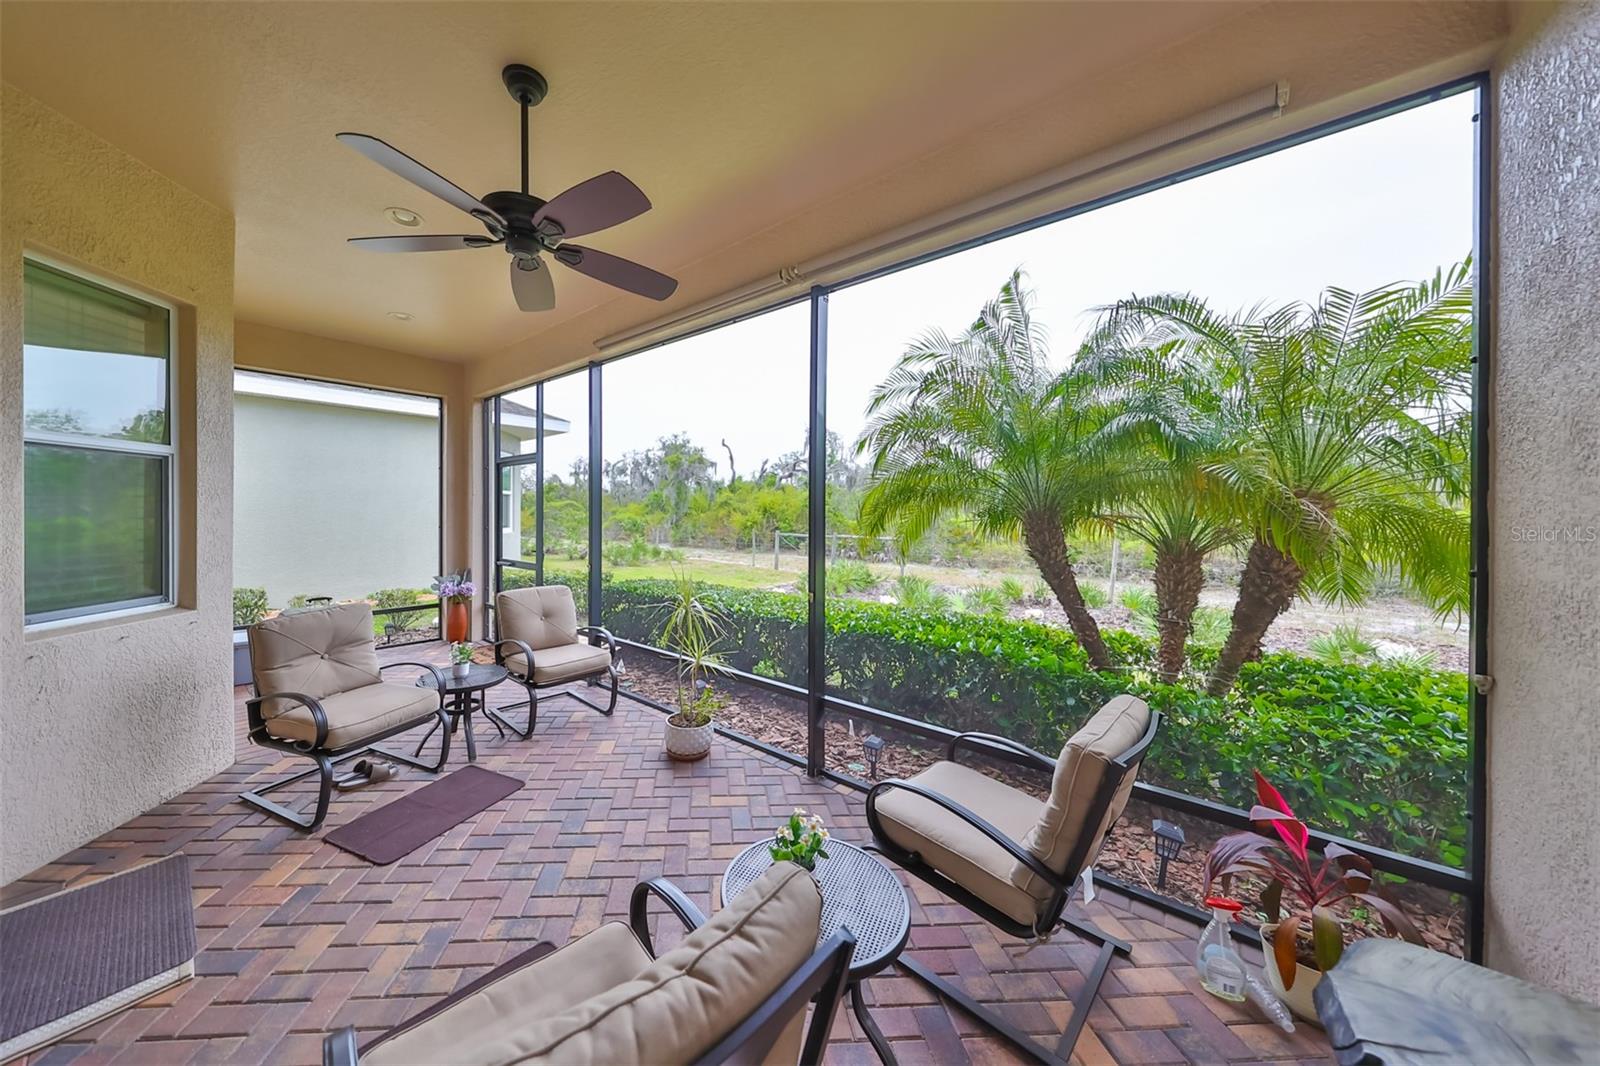 The lanai has ceiling fan, custom brick pavers and is enclosed so that you can enjoy this space all year round!